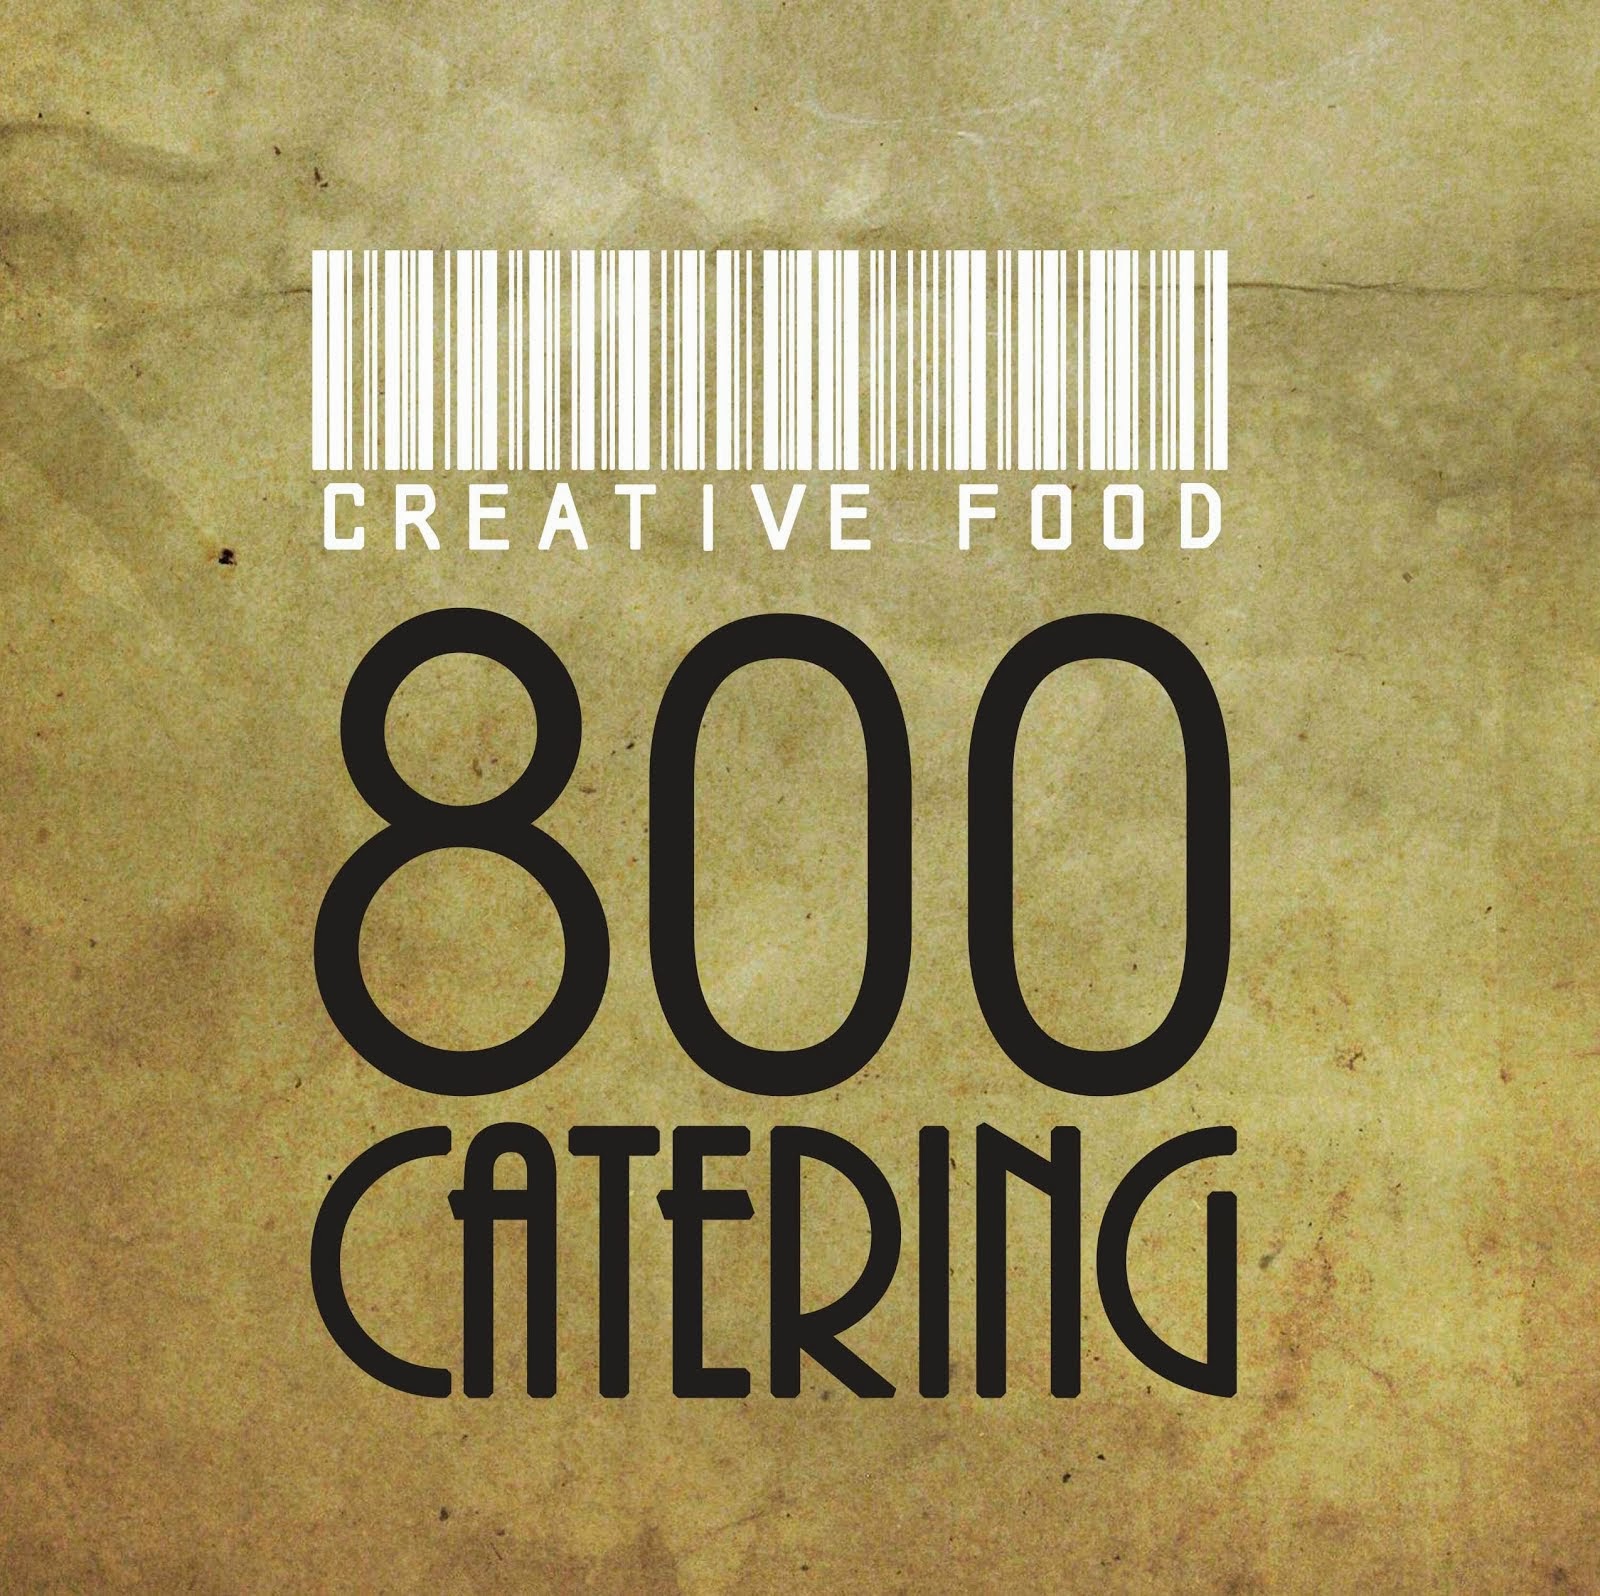 800 catering